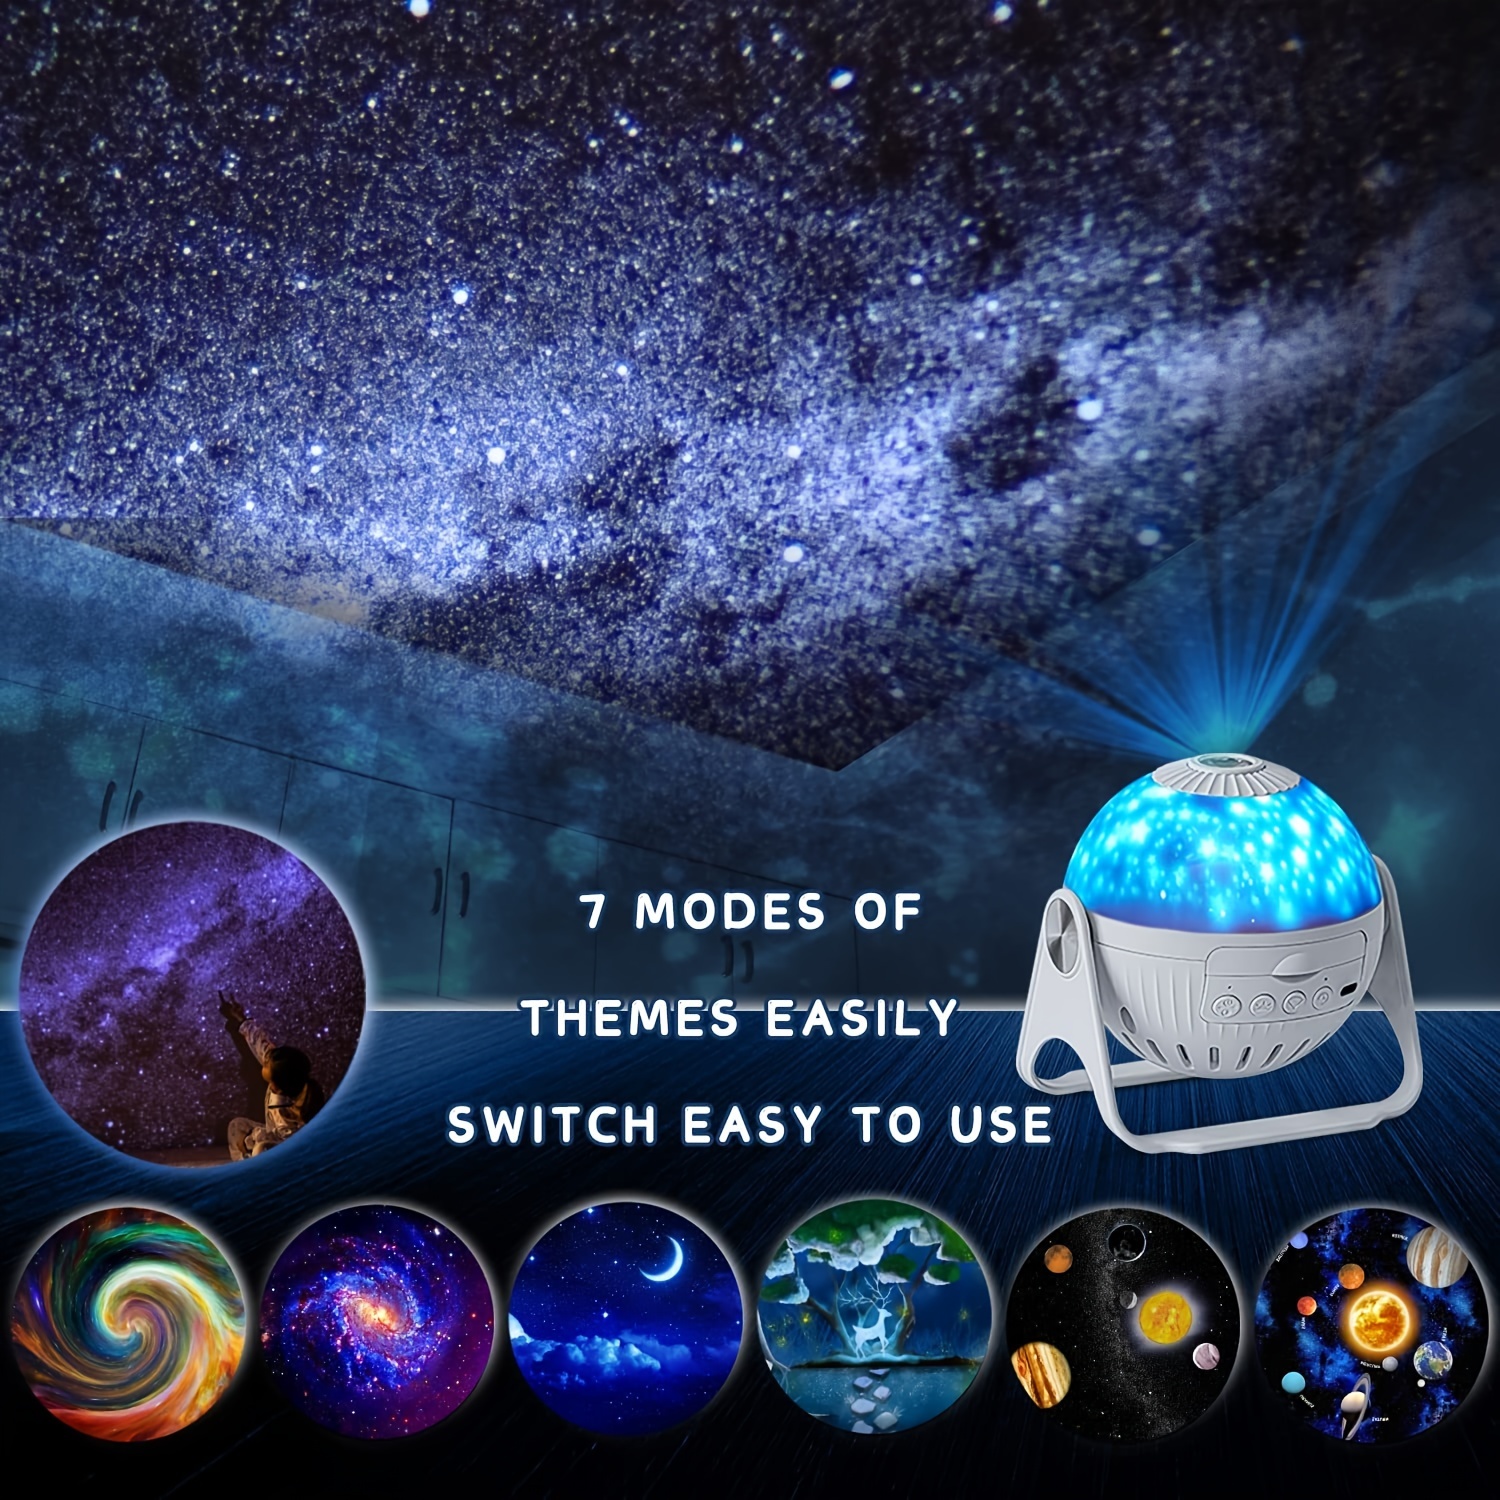 Planetarium Projector Star Projector Galaxy Projector-7 in 1 Constellation  Projector,360° Adjustable with Planets Nebulae Moon, Ceiling Projector for